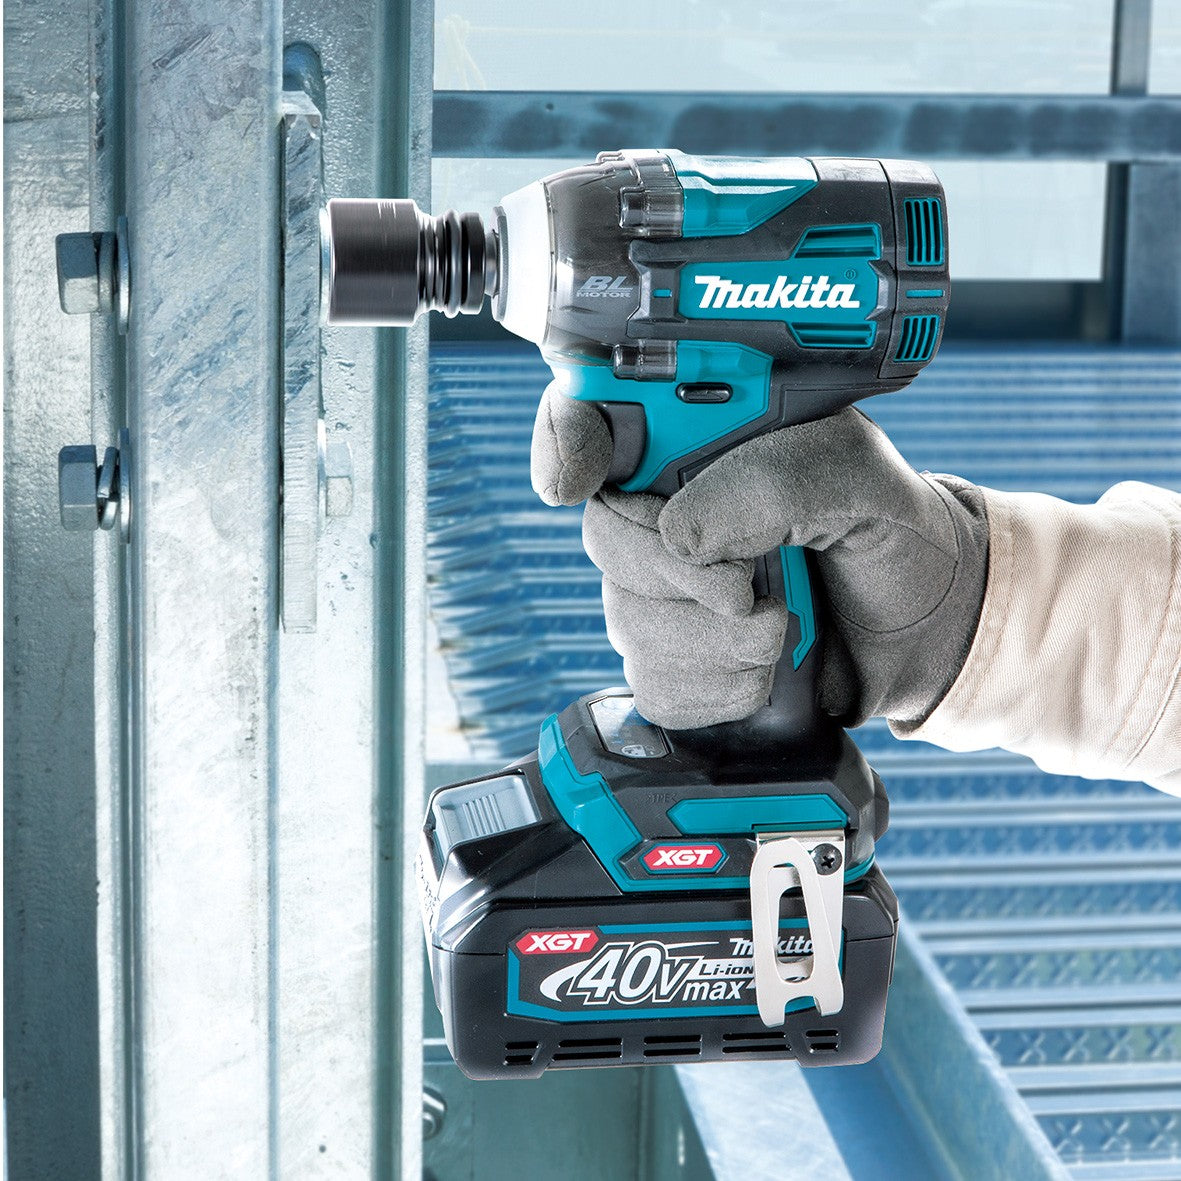 40V 1/2" Brushless Impact Wrench Bare (Tool Only) TW004GZ by Makita